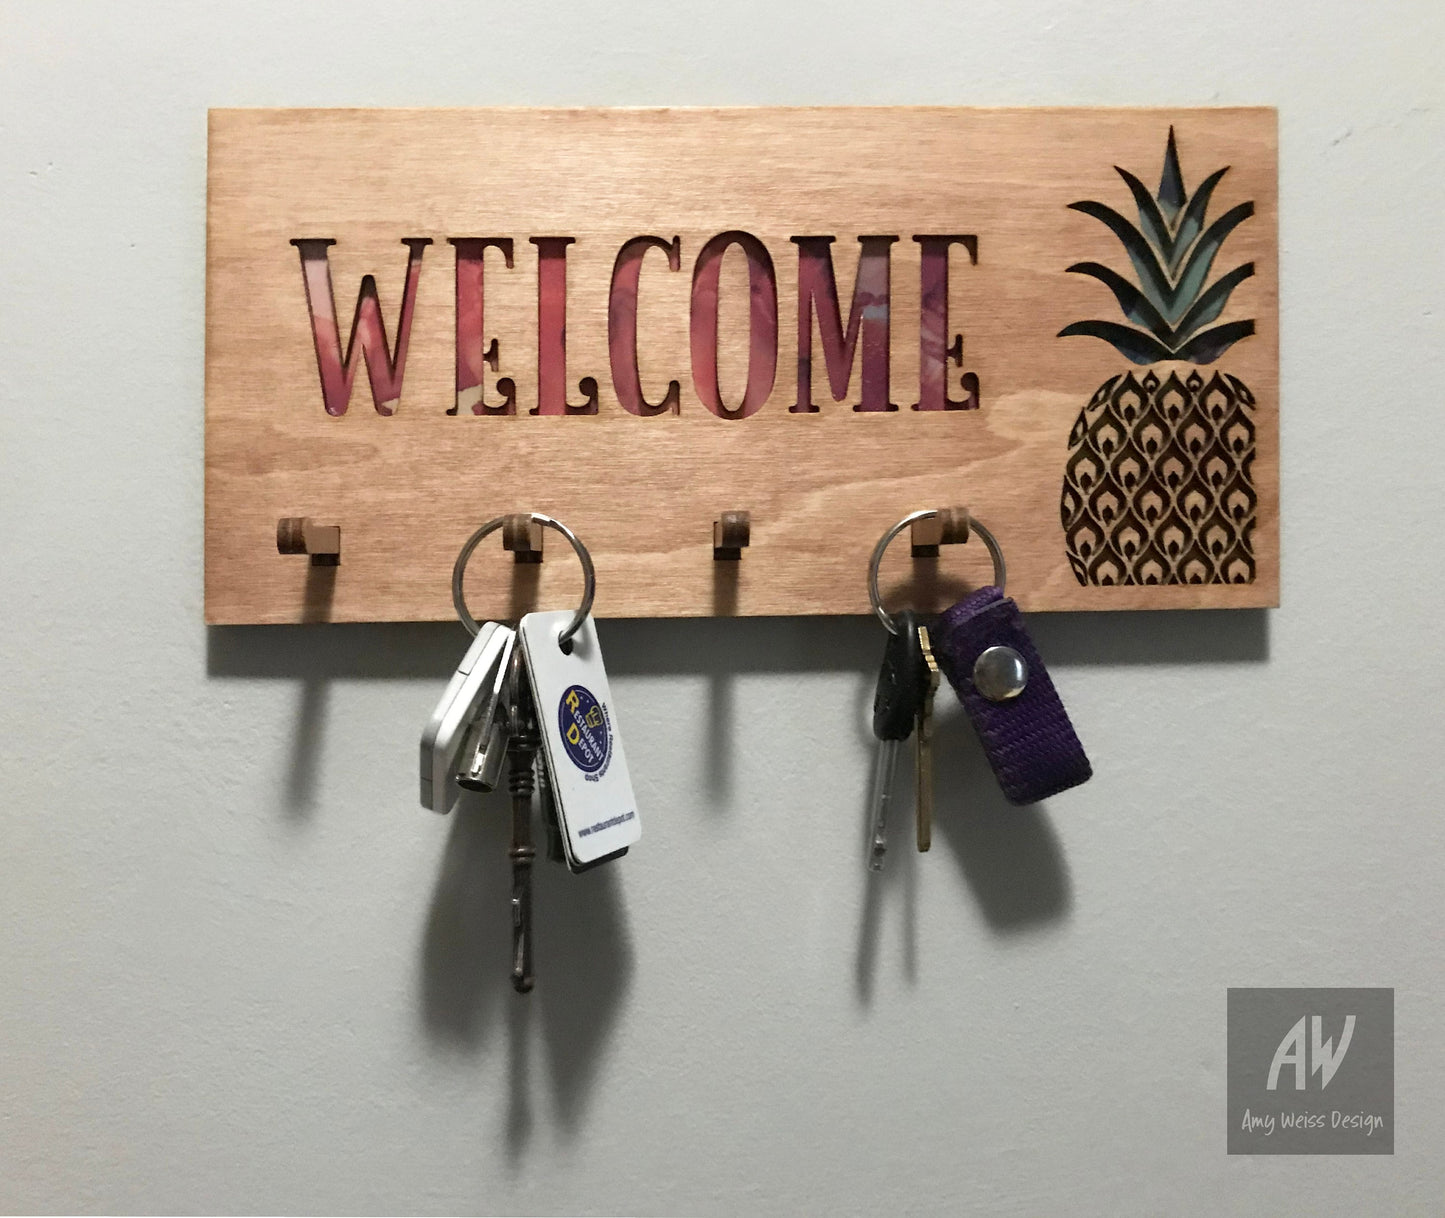 Lightly stained wood rectangular key holder. Cutout "Welcome" with red background, pineapple with green, yellow, and orange, and 4 pegs for keys with keys hanging on them.